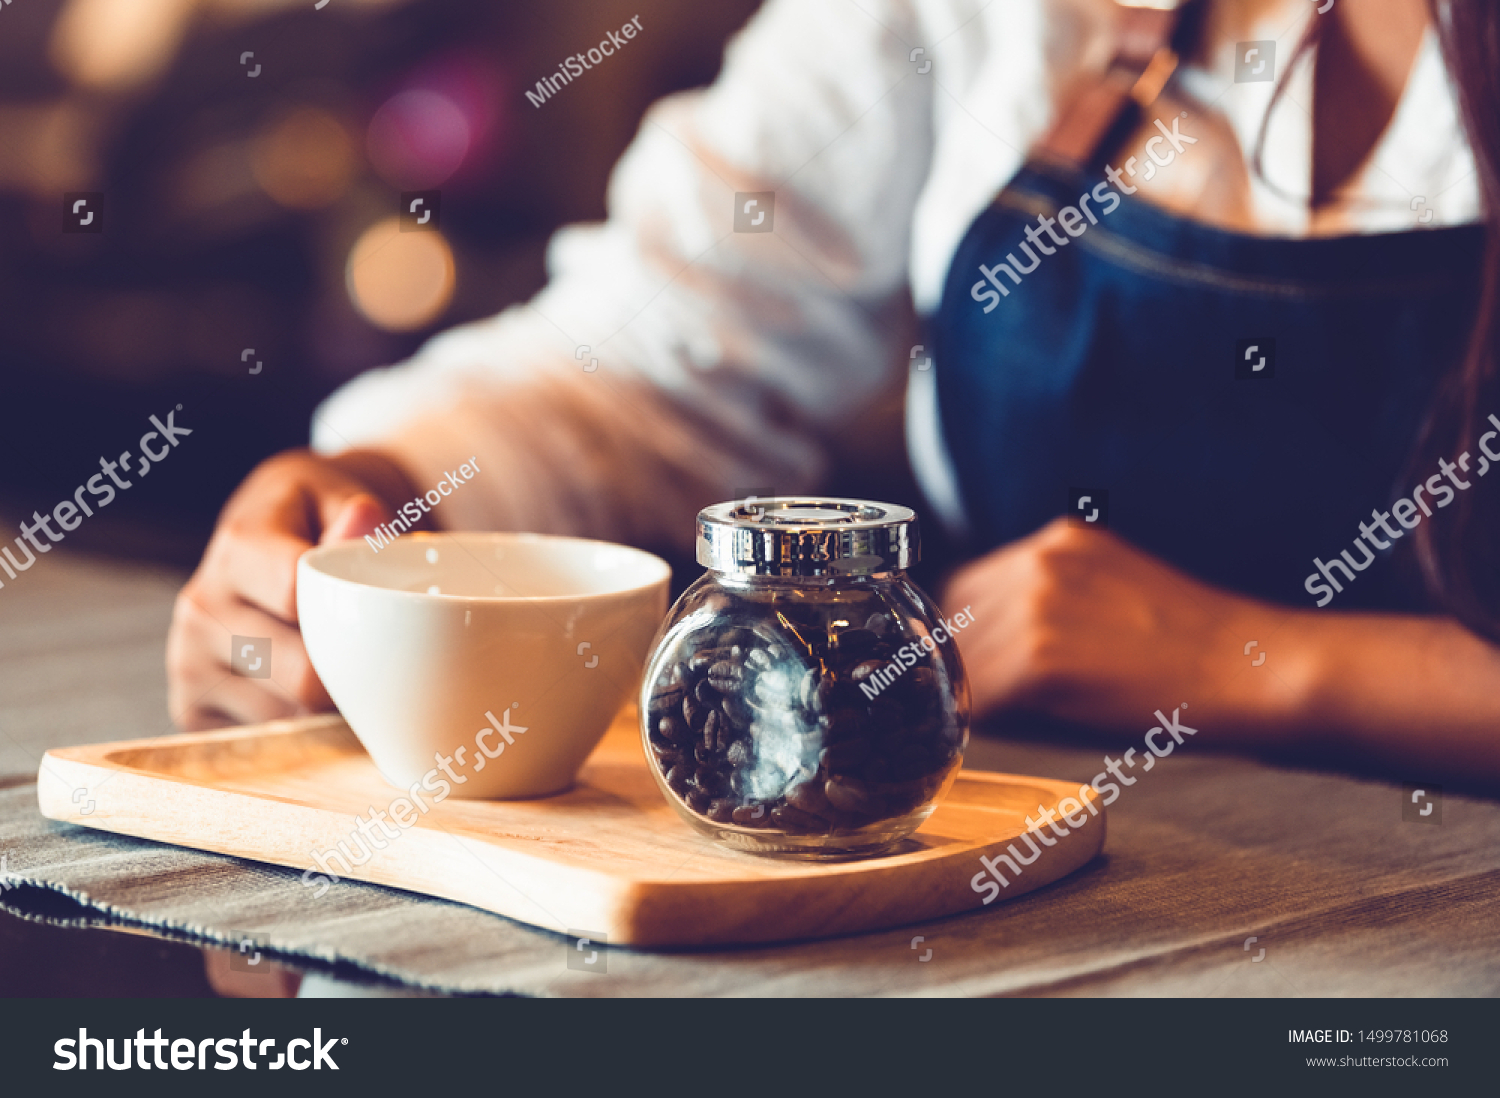 Closeup of professional female barista hand making and holding white cup of coffee. Happy young woman at counter bar in restaurant background. People lifestyles and Business occupation concept #1499781068